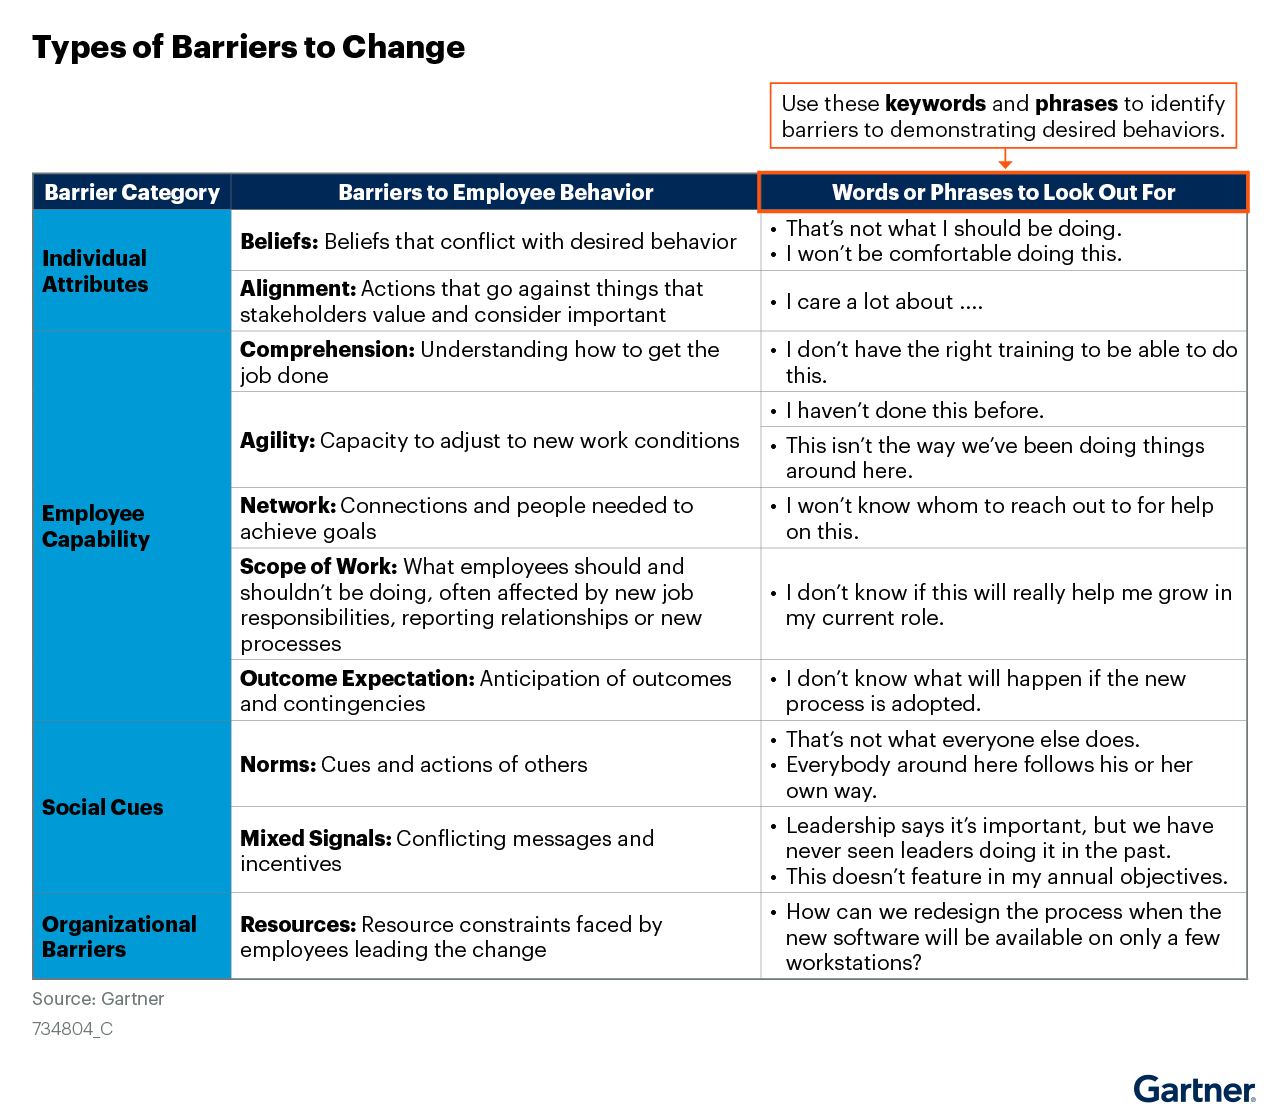 Illustrative-list-of-barriers-to-change-which-includes-individual-attributes,-employee-capability-social-cues-and-organizational-barriers-target